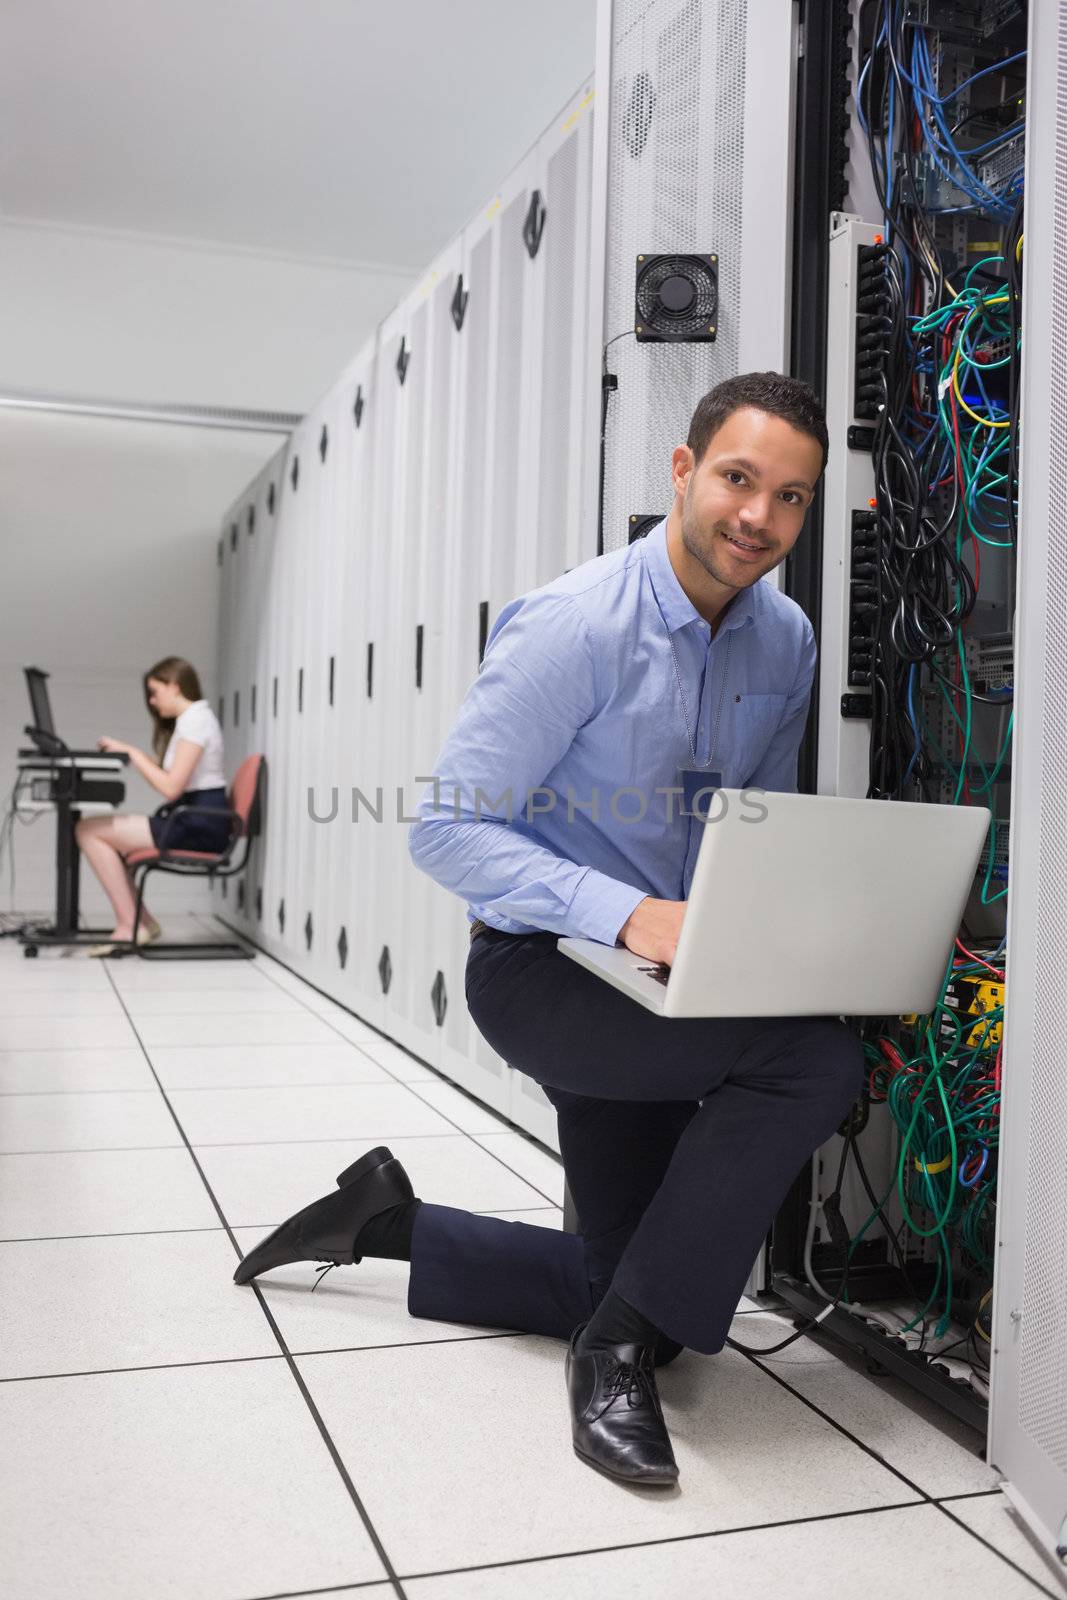 Two people doing data storage with laptops